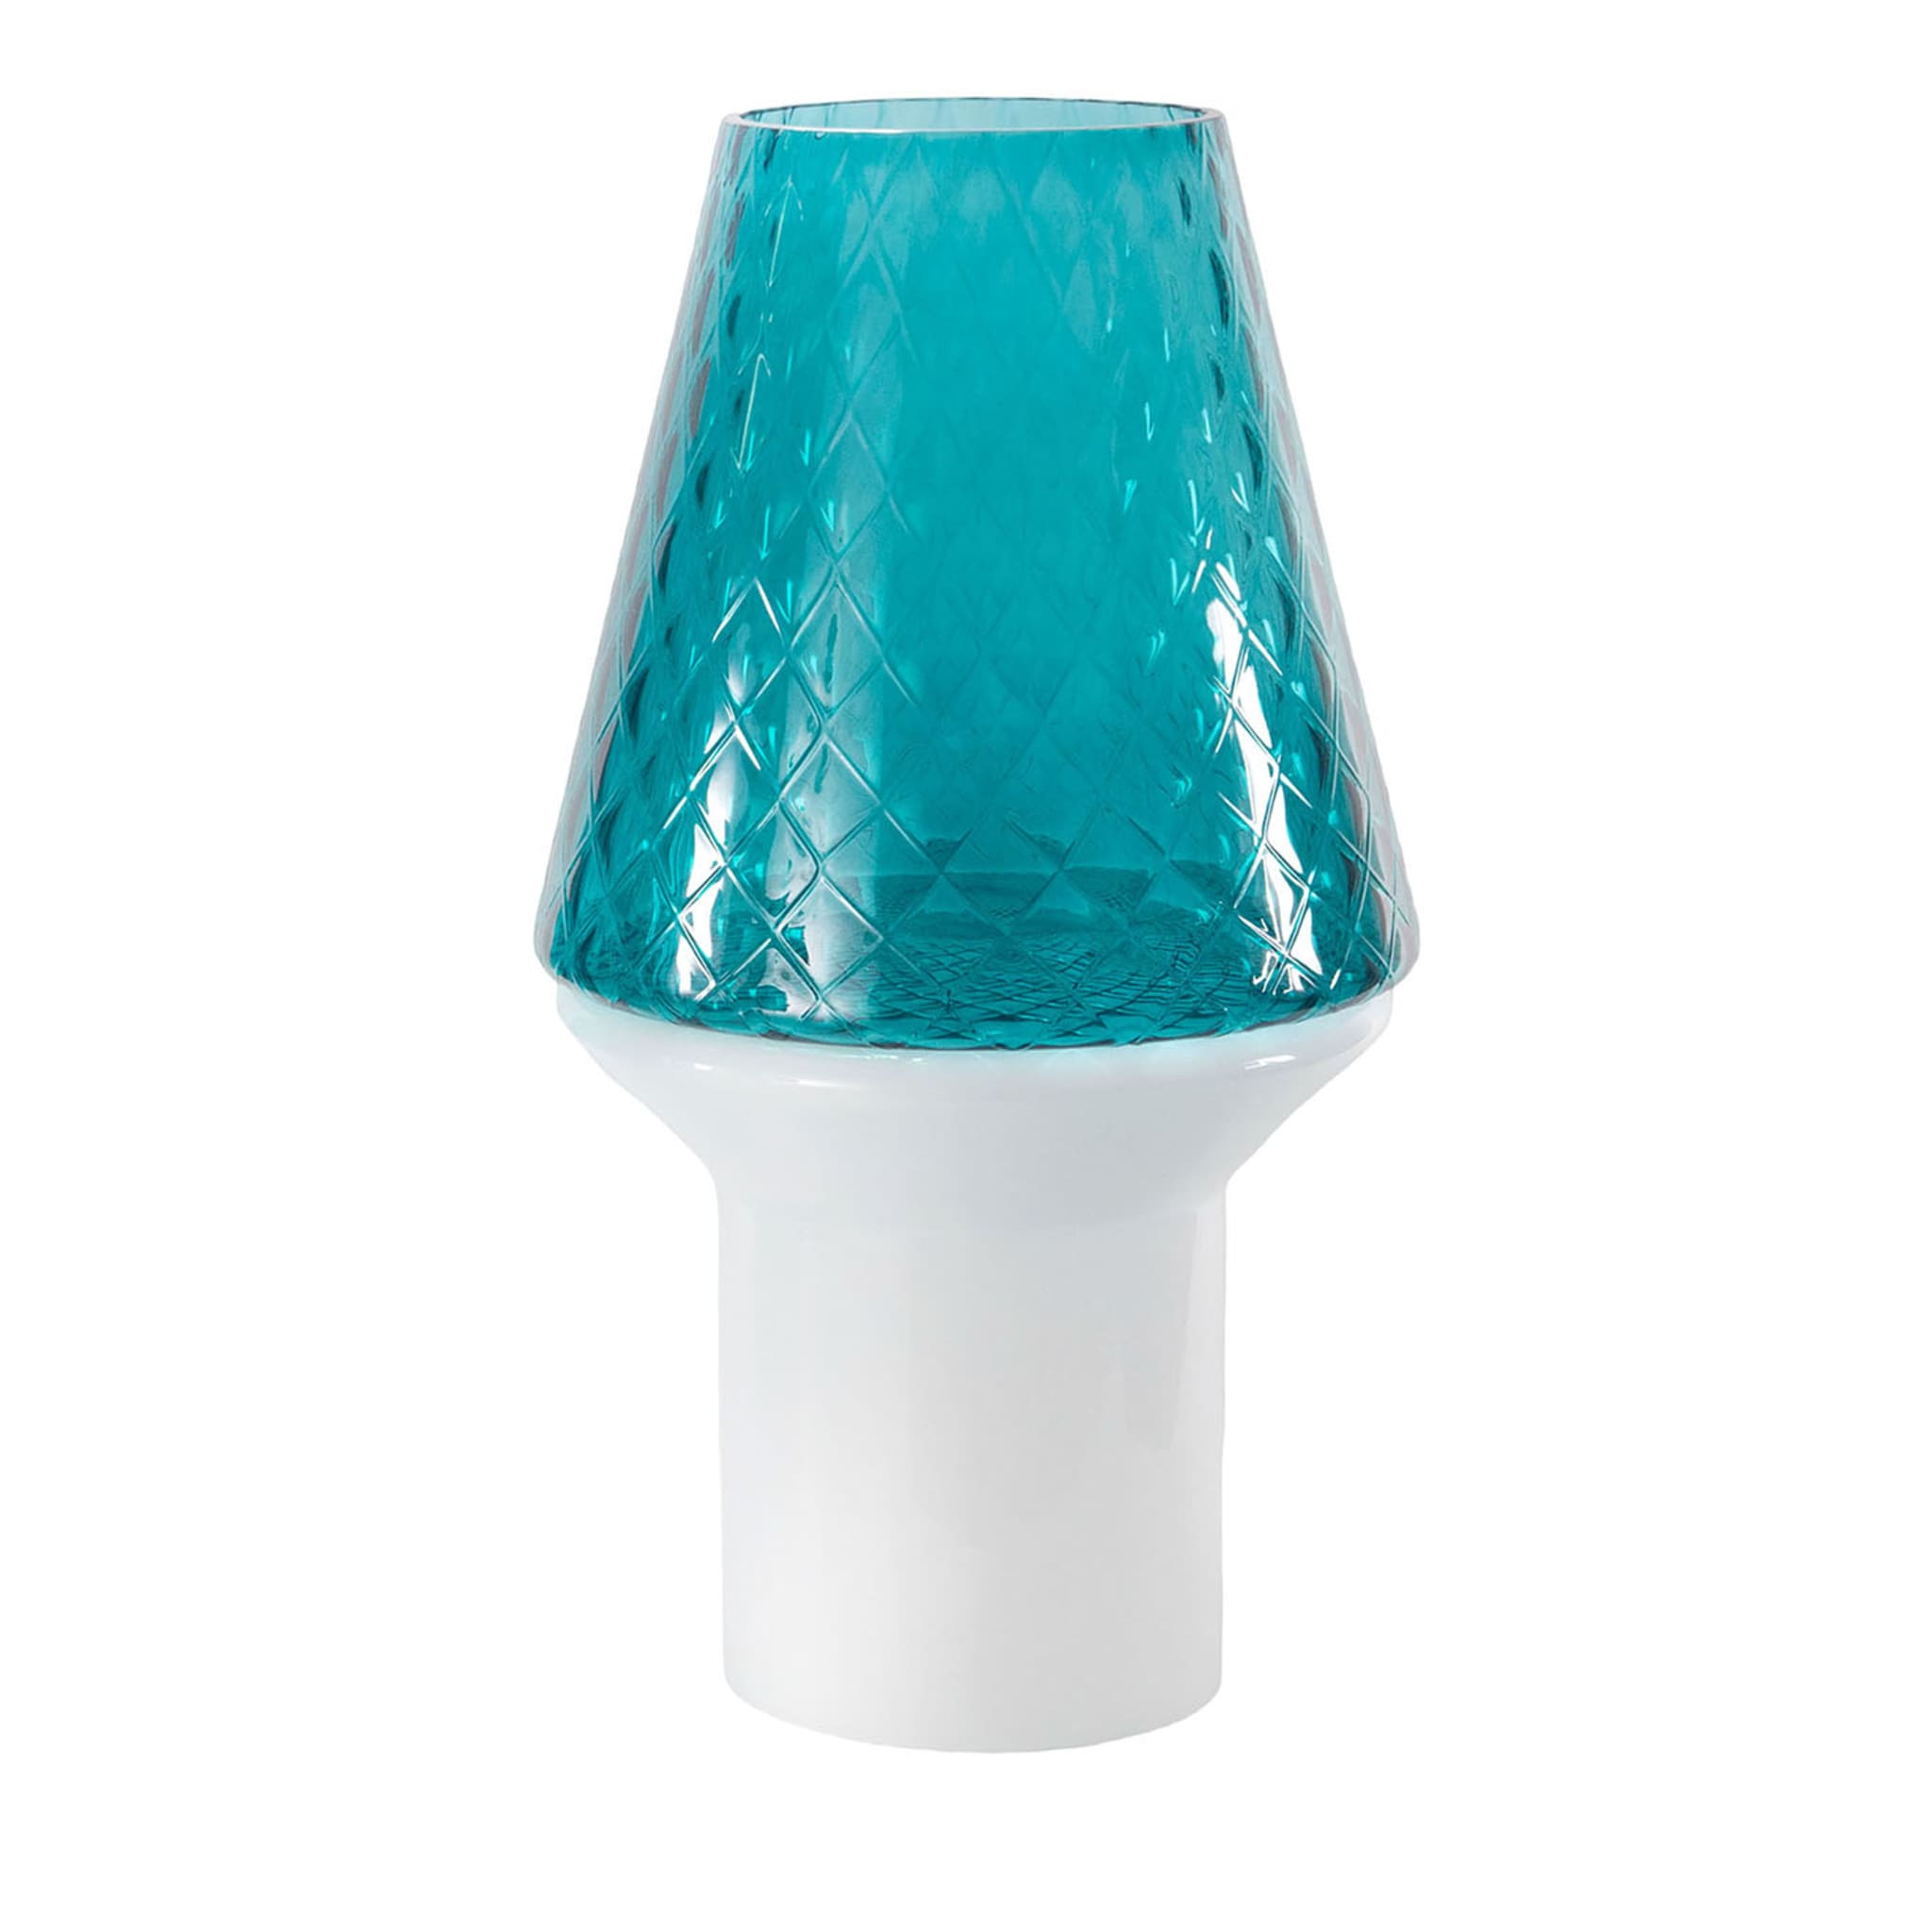 Forest Turquoise Table Lamp by Romani Saccani #2 - Main view